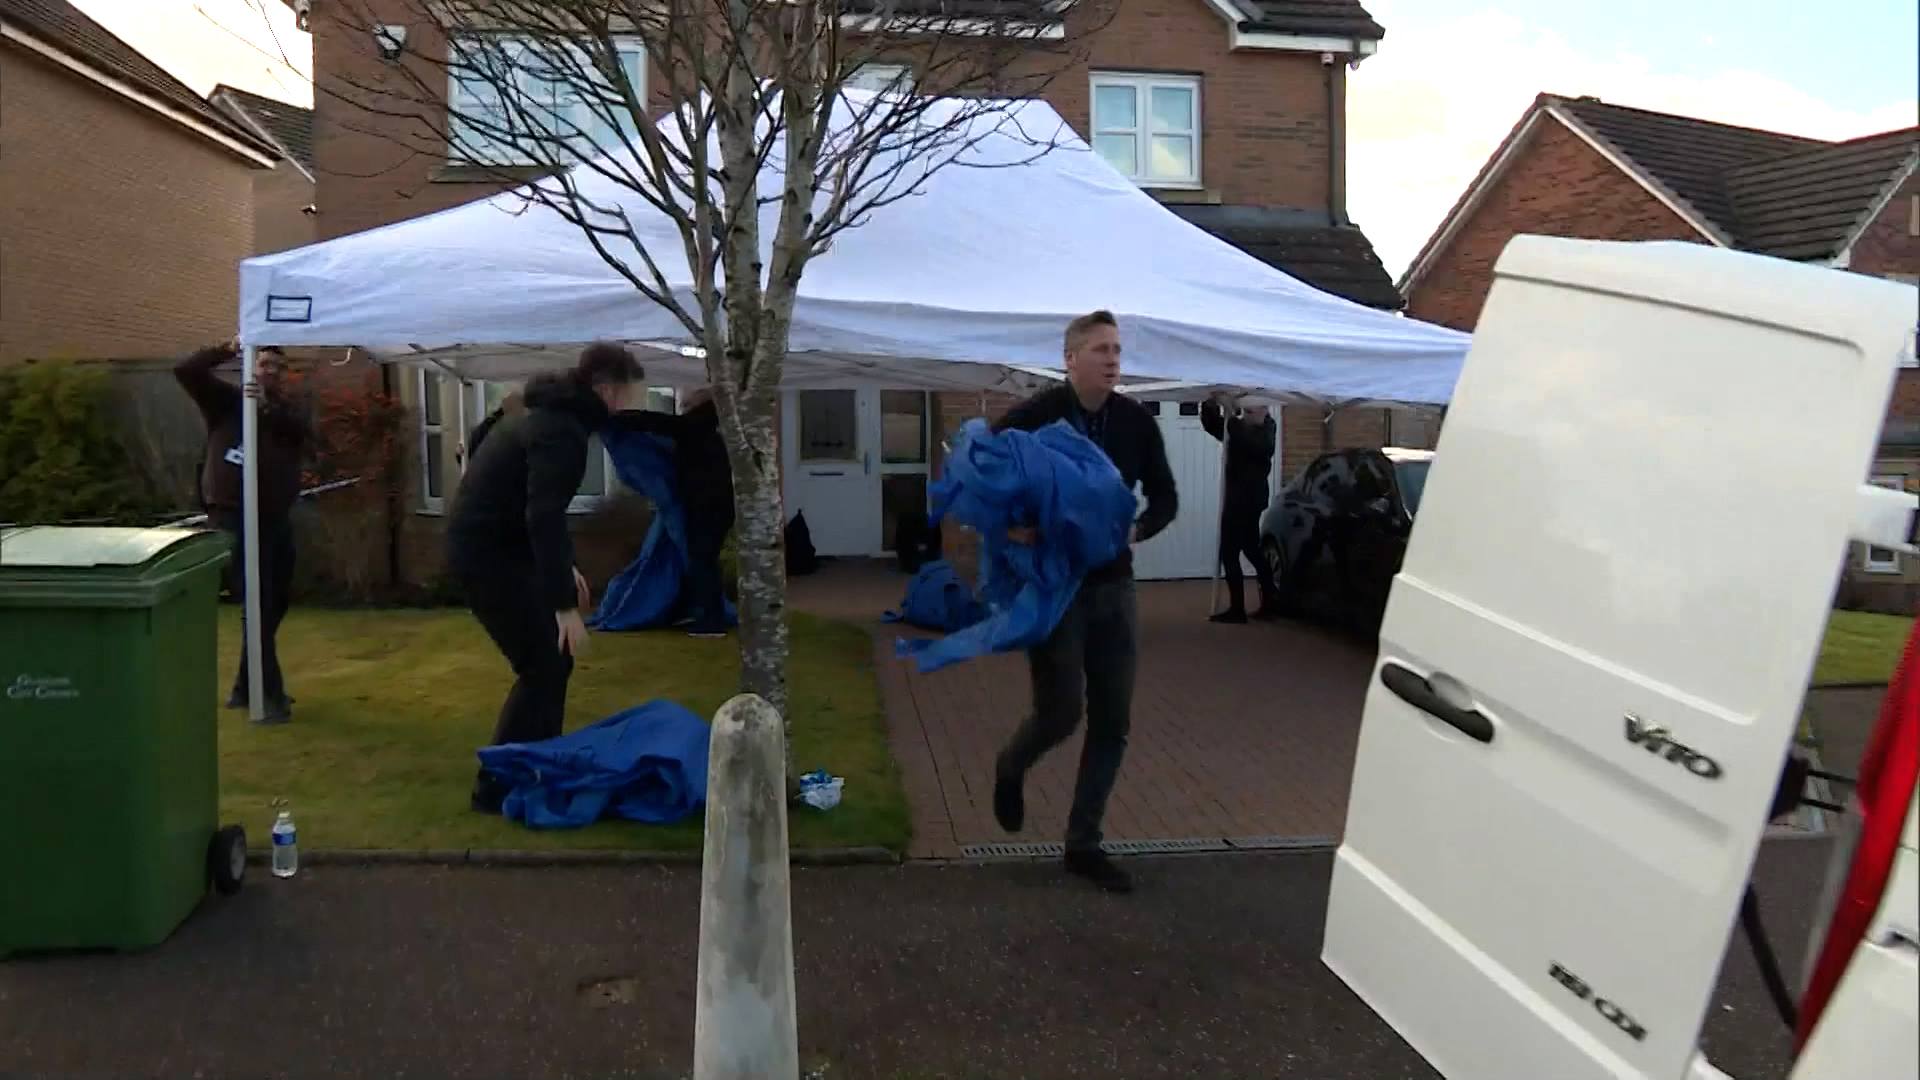 Police erected large tents outside Peter Murrell and Nicola Sturgeon's home.